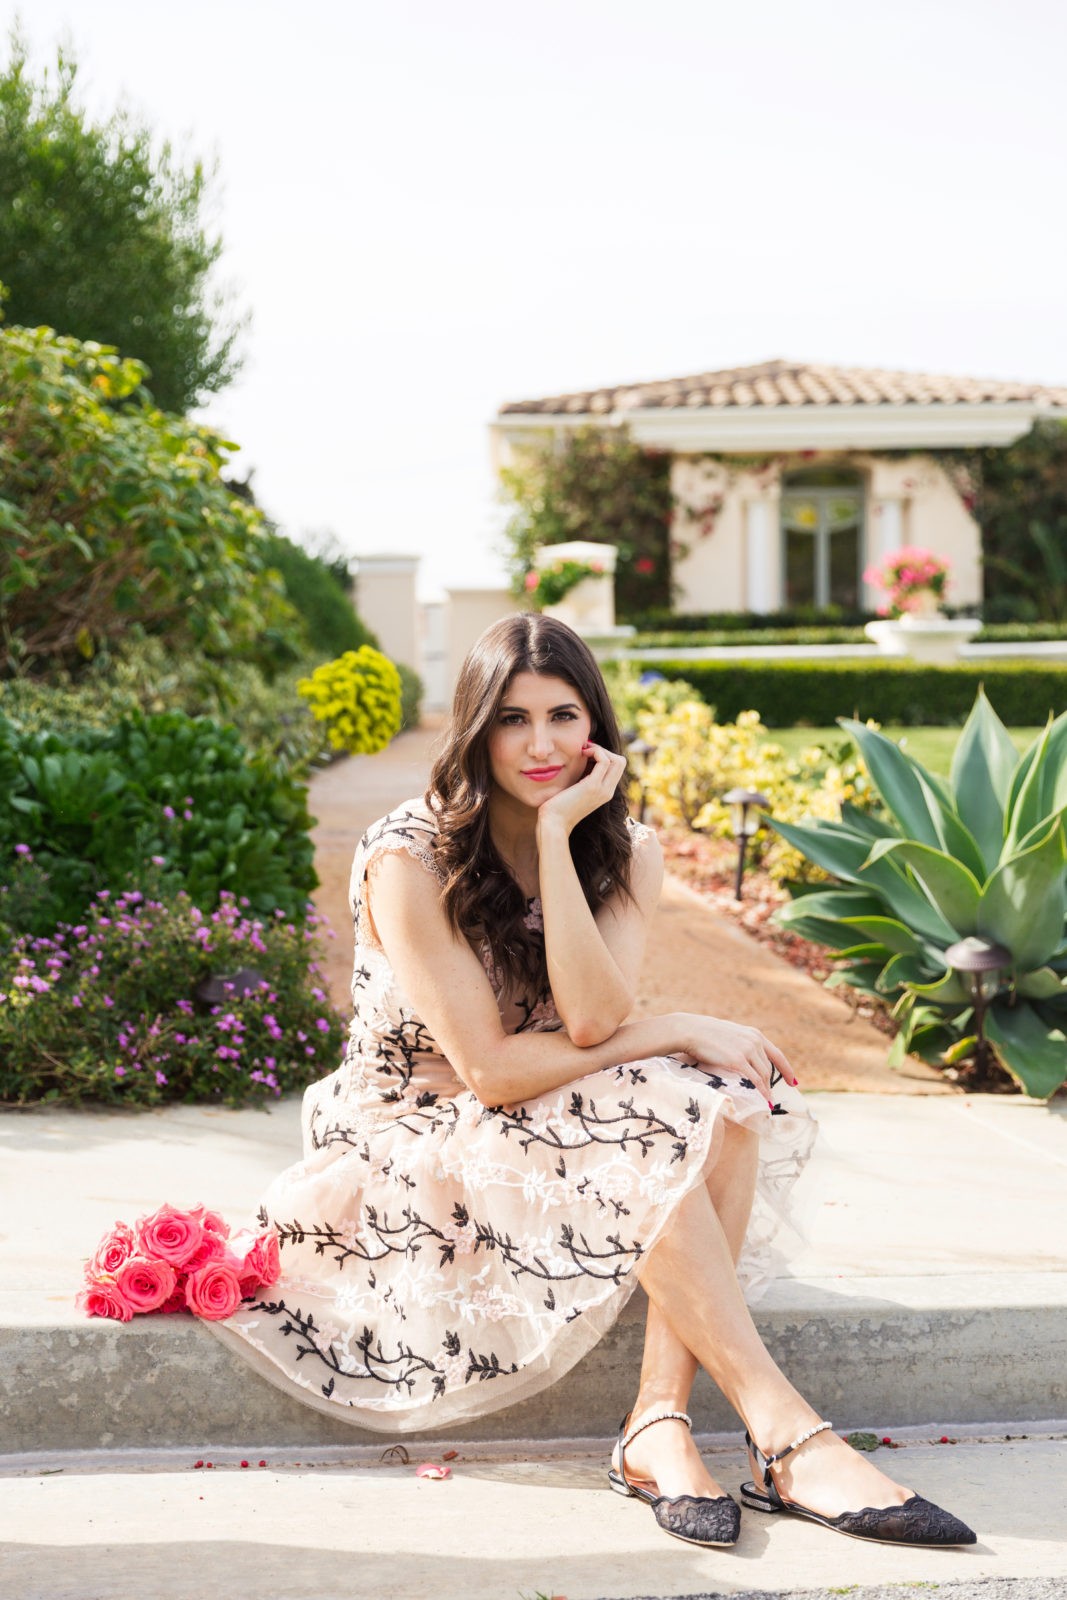 Designer Highlight: Bronx and Banco by popular Los Angeles Fashion Blogger Laura Lily: image of woman wearing Cloe Embroidered mini dress sitting outside next to a pile of pink roses.